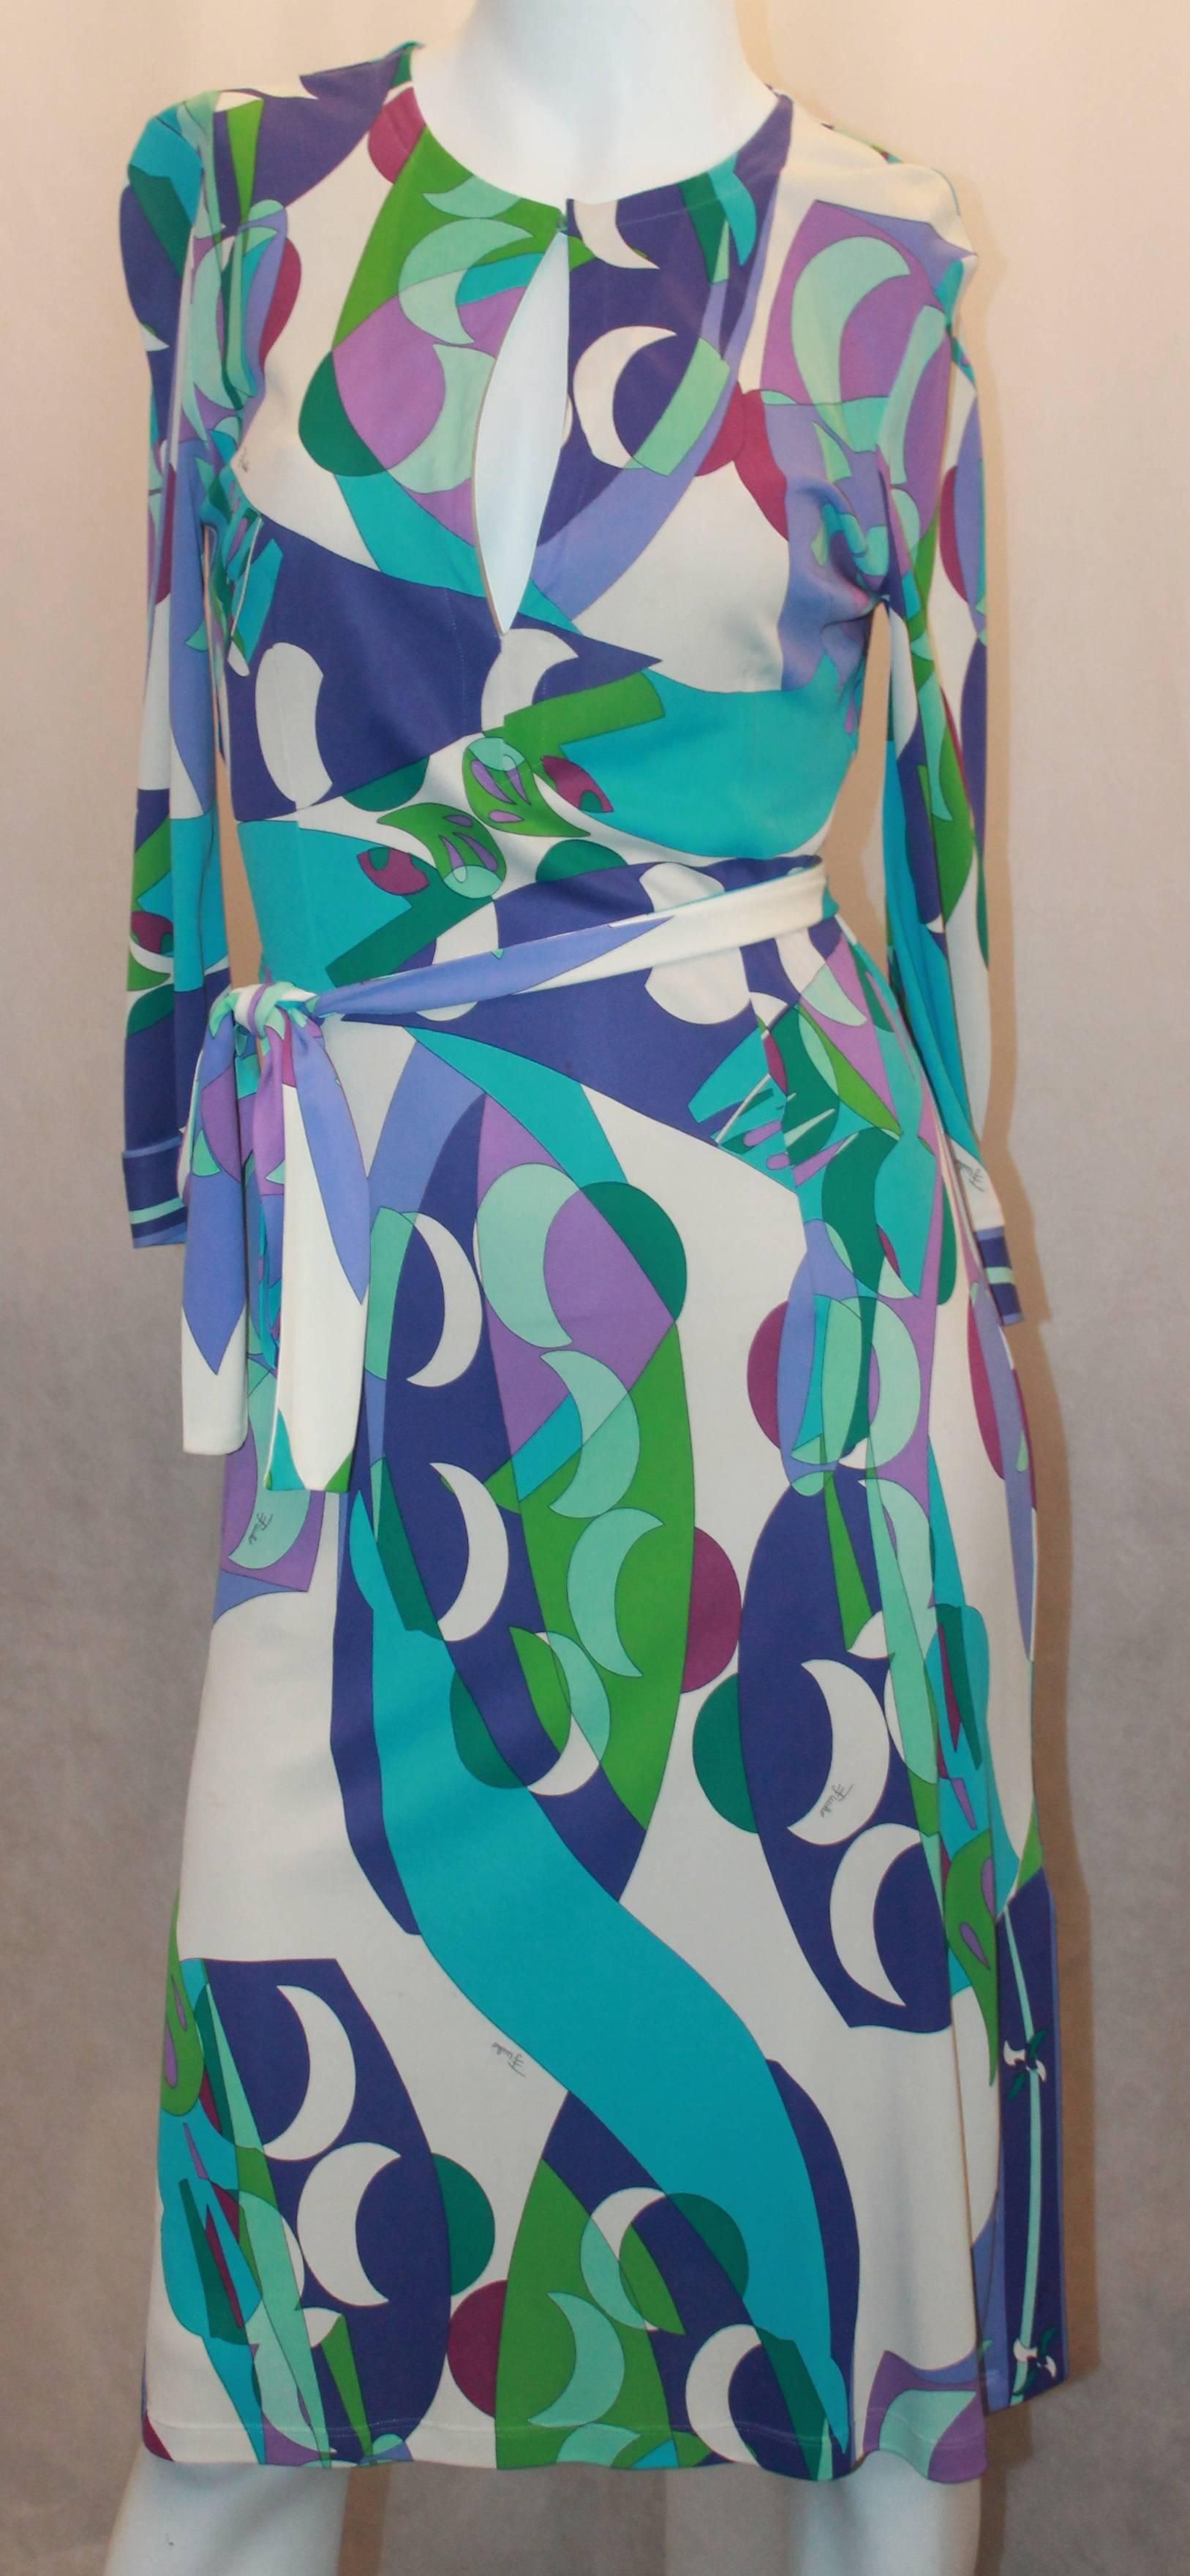 Emilio Pucci Purple, Green, White, & Blue Print Silk Jersey 3/4 Sleeve Dress - 4.  This lovely dress is in excellent condition.  It features a lovely purple, green, blue, and white print silk jersey material, 3/4 length sleeves, a front button